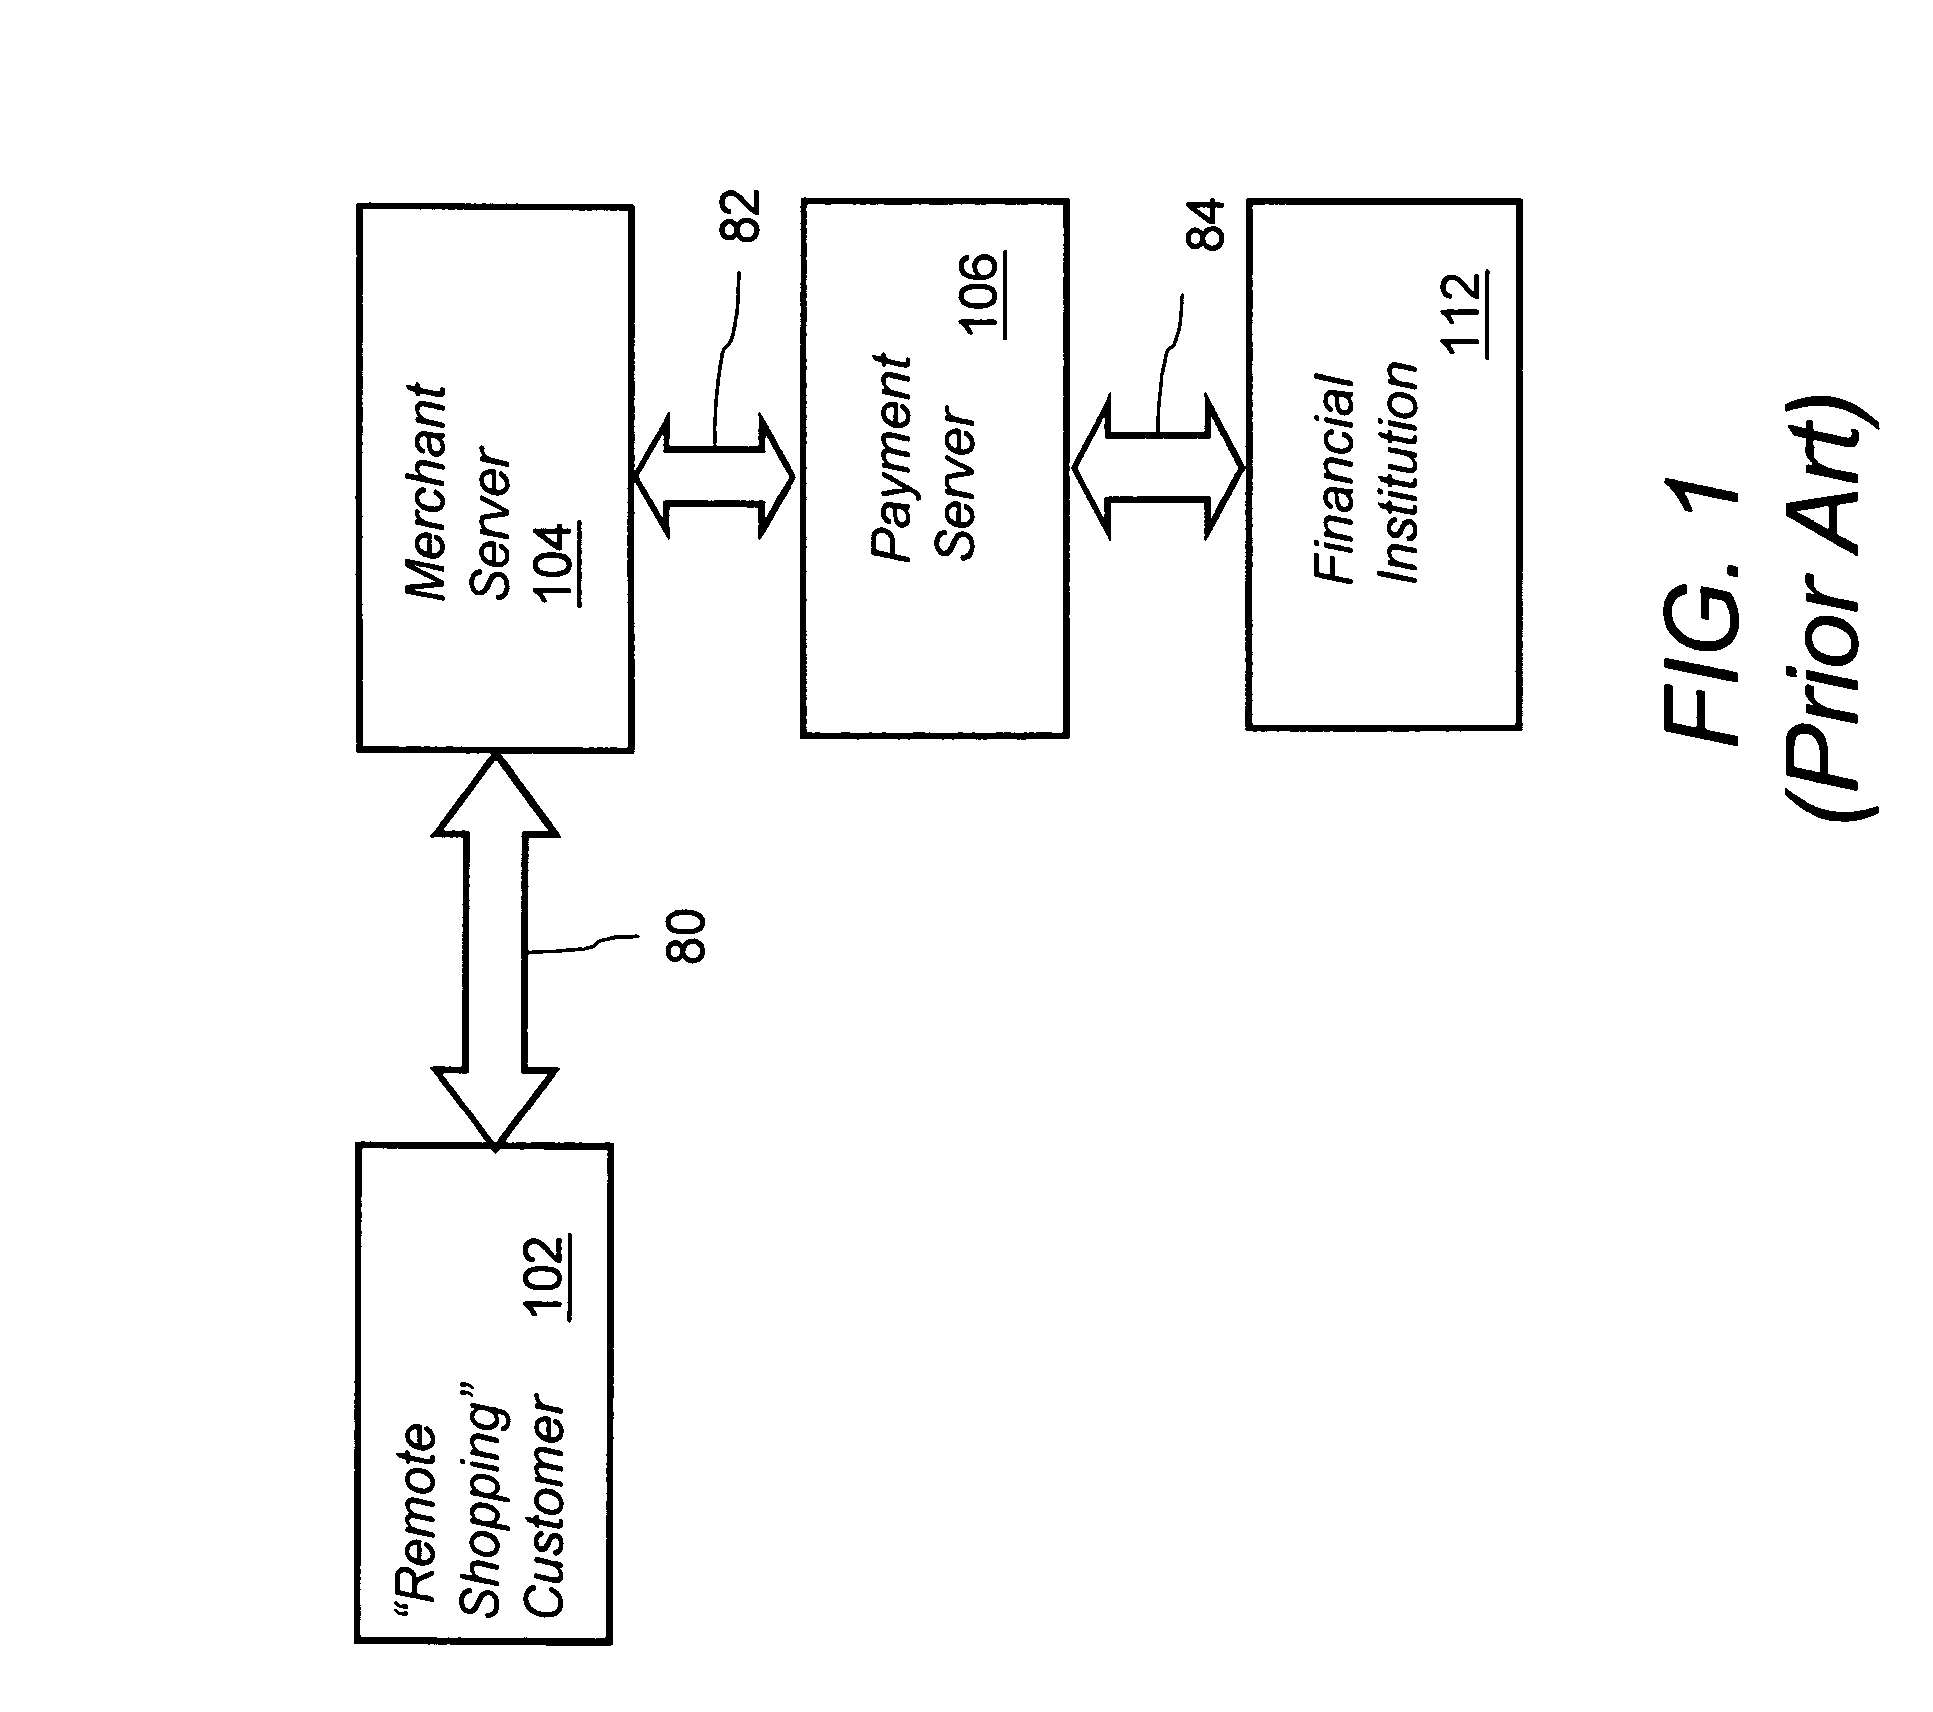 Mobile communication device equipped with a magnetic stripe reader